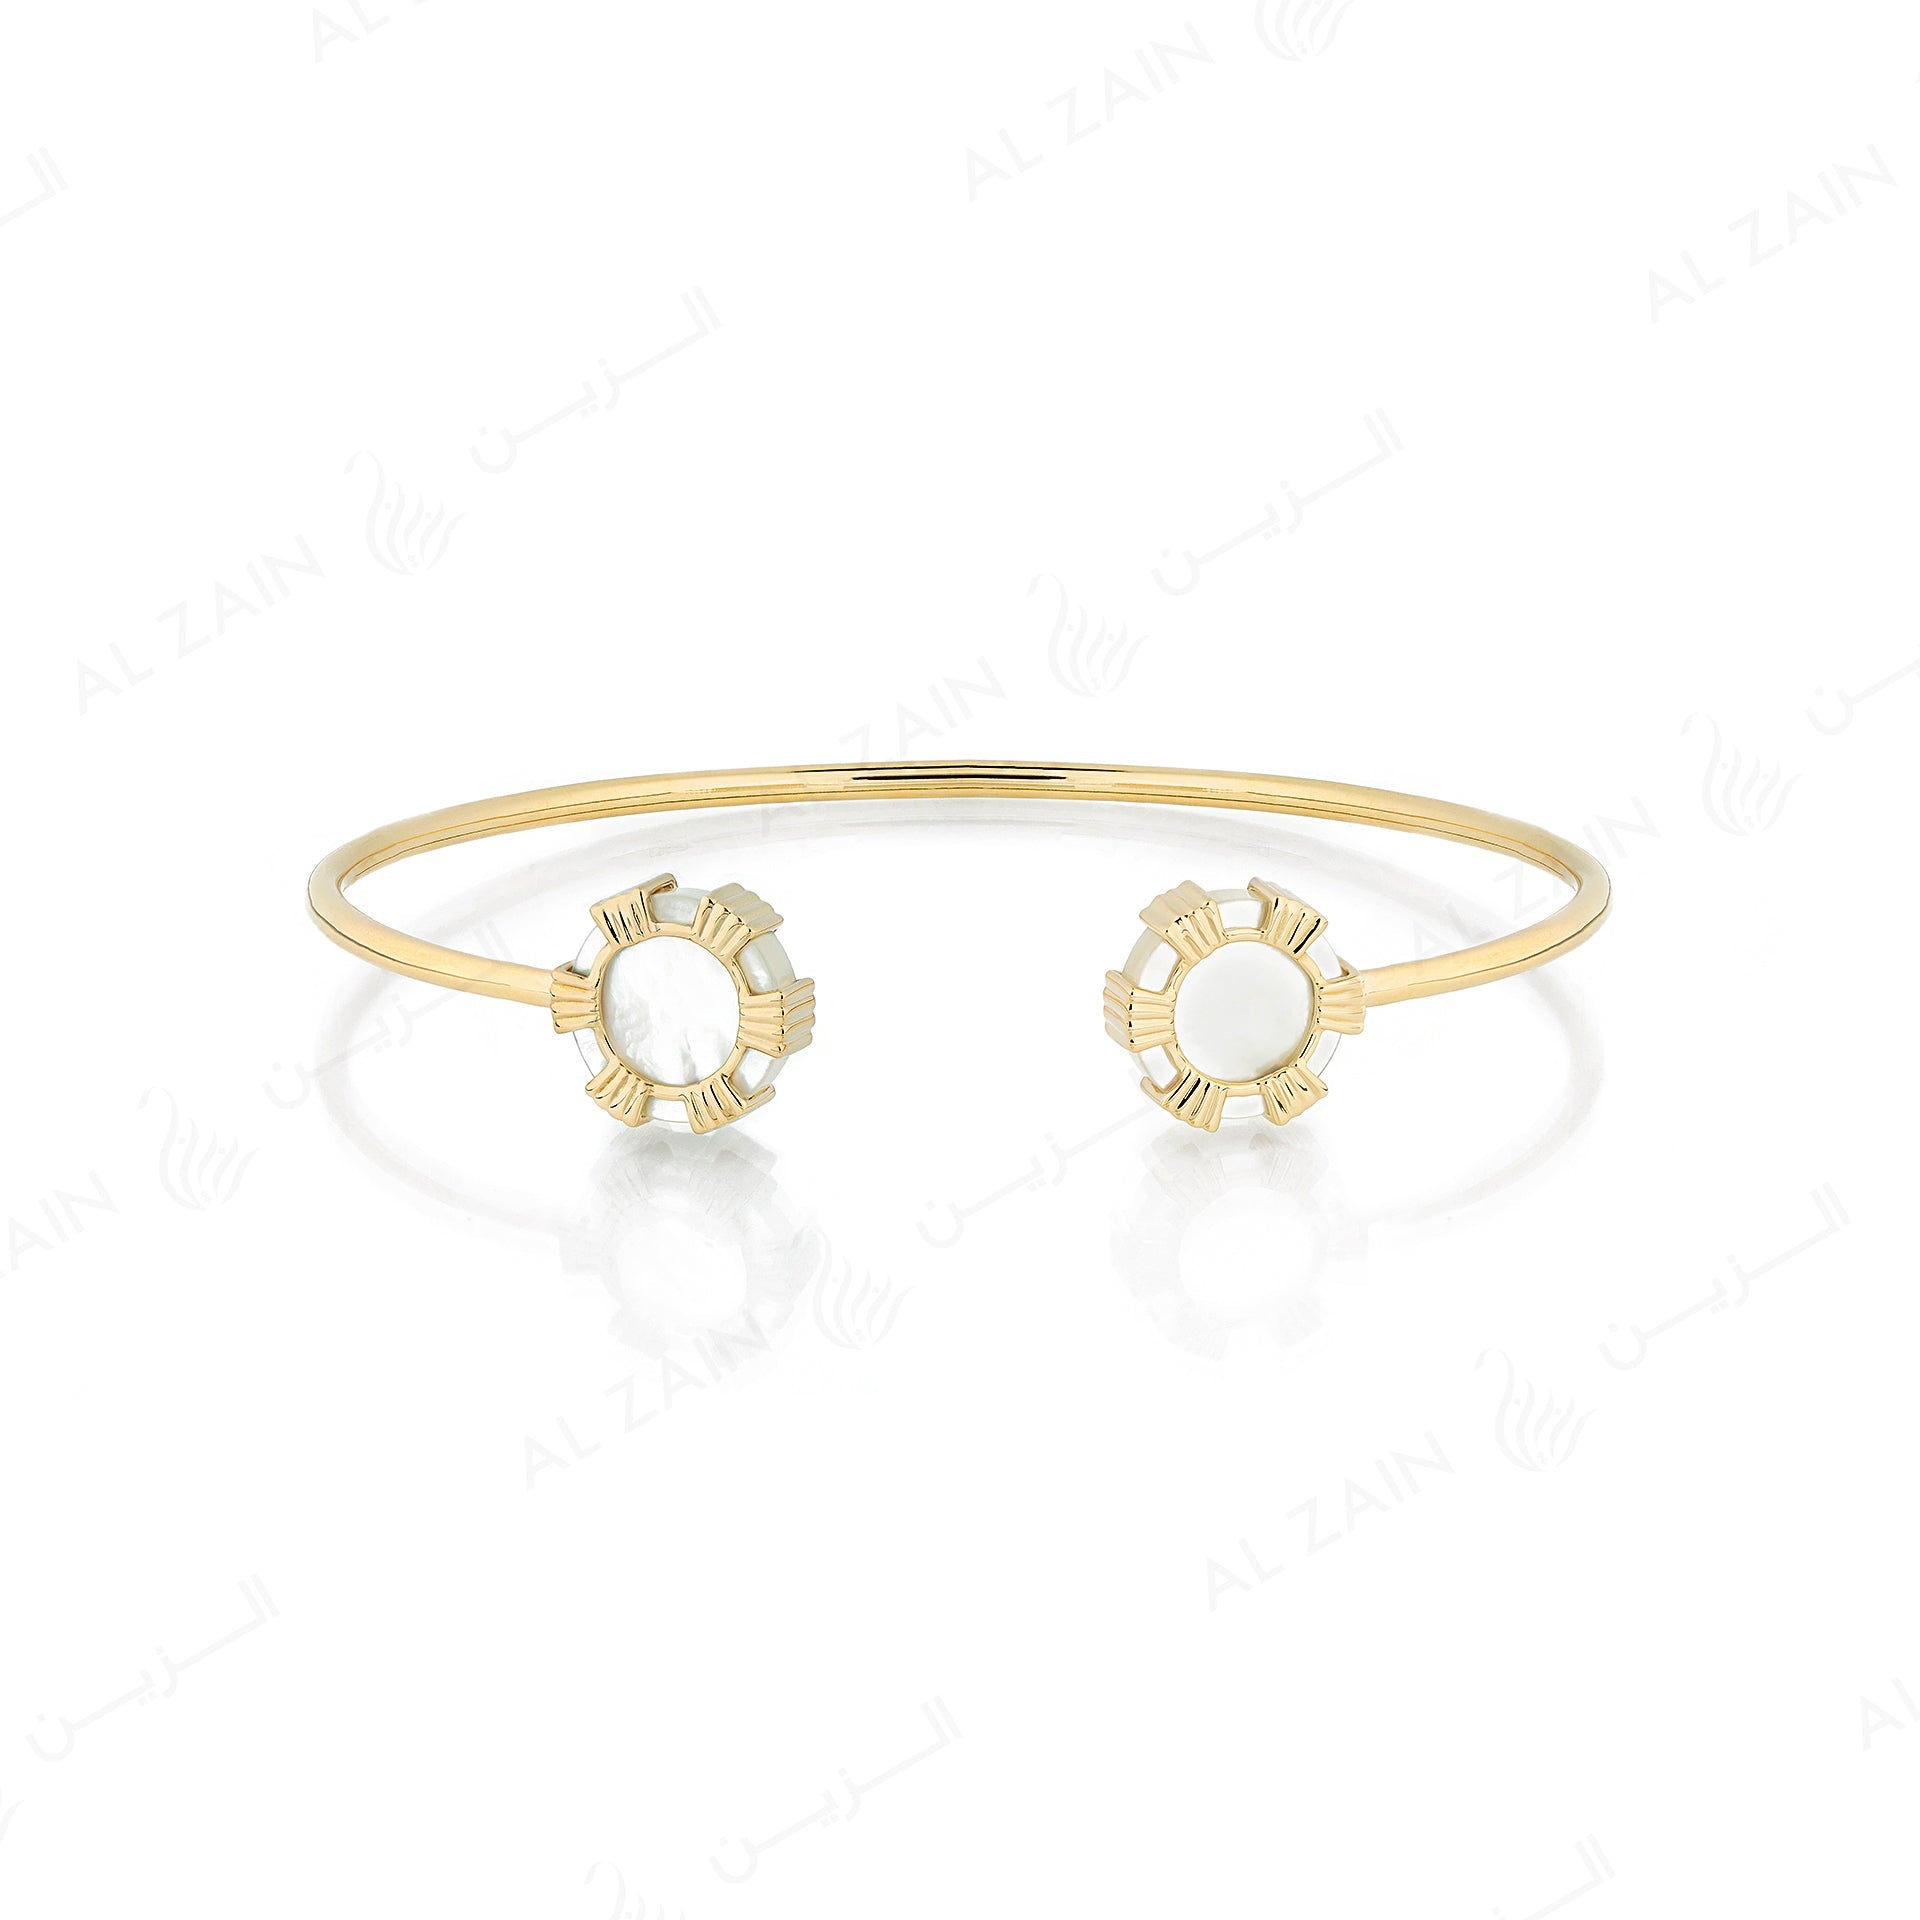 Cordoba bangle in yellow gold with mother of pearl stones